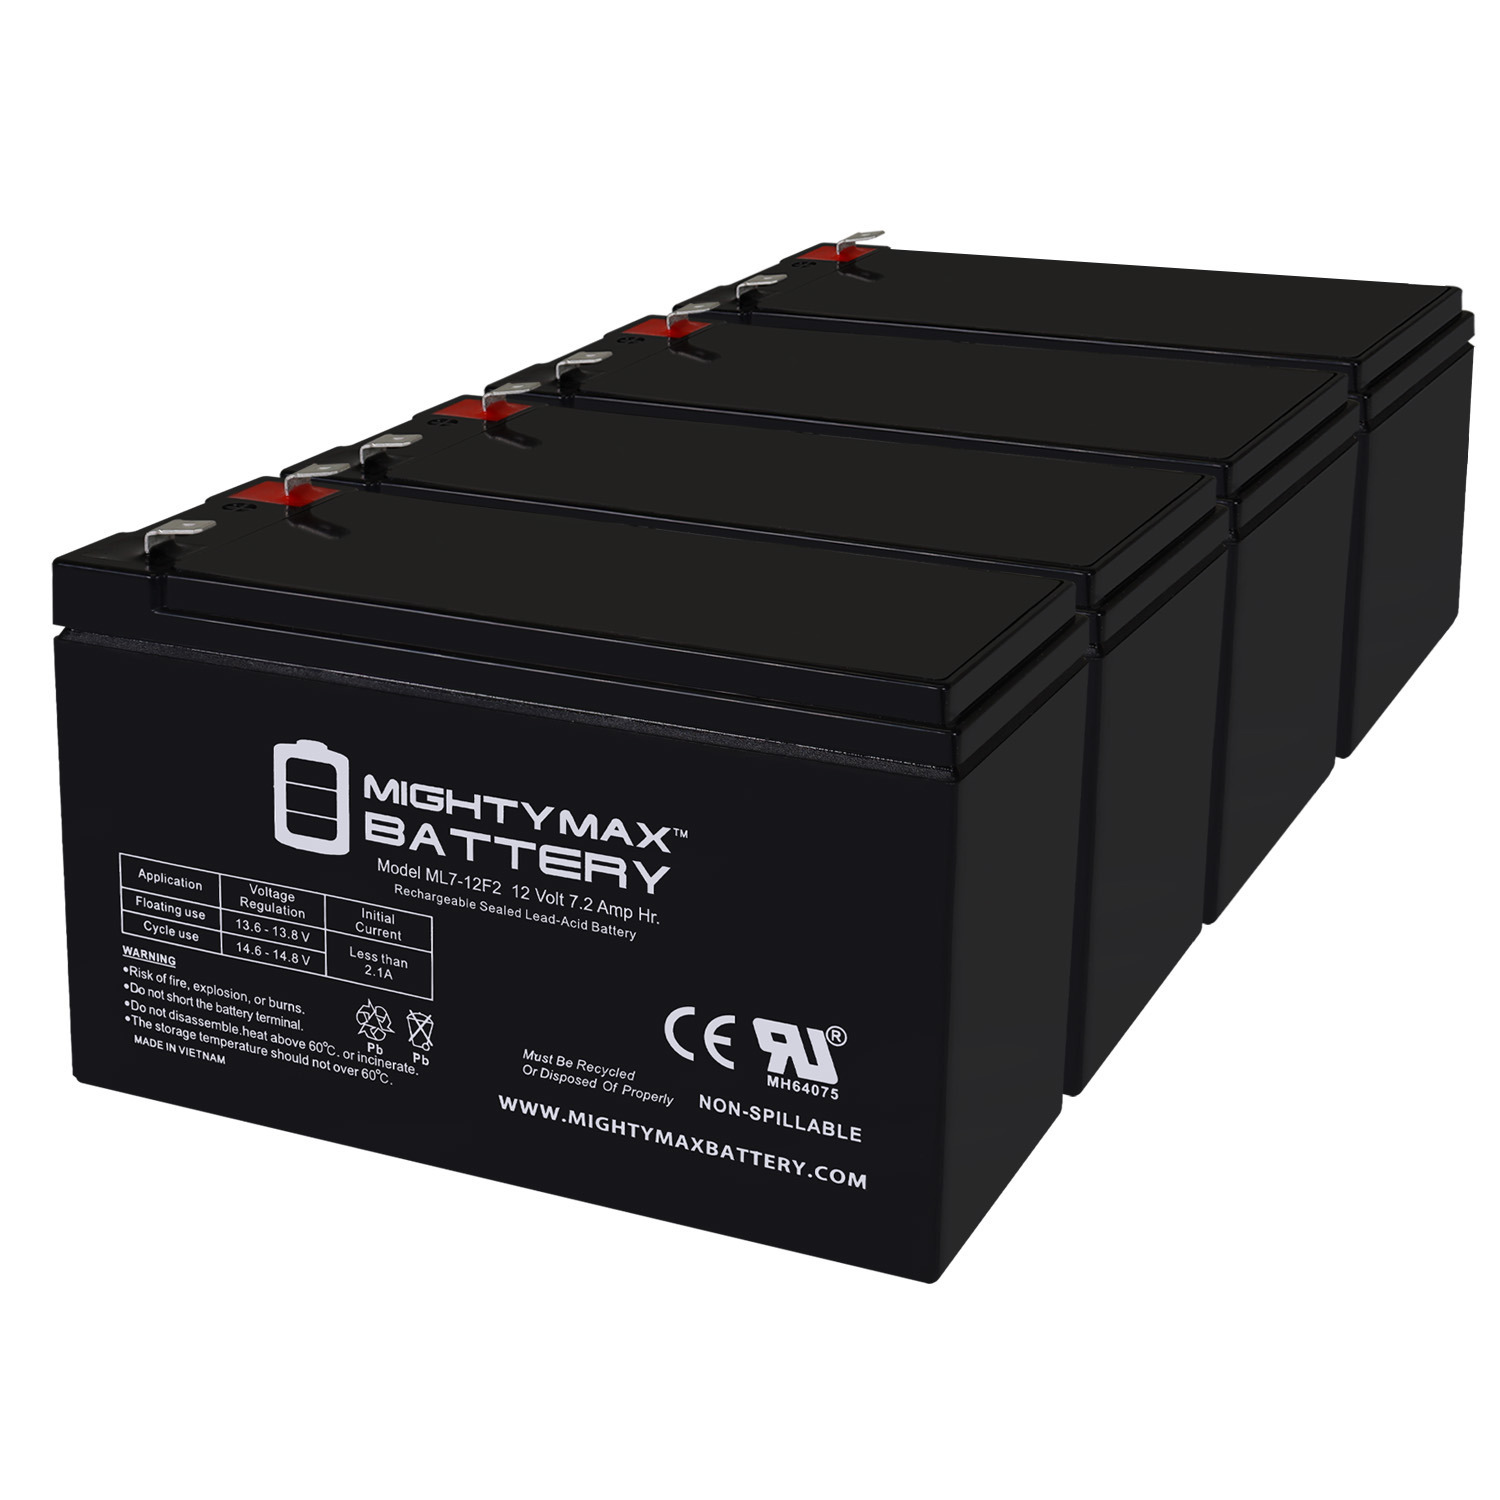 12V 7Ah F2 Replacement Battery for Minuteman E BP1 - 4 Pack